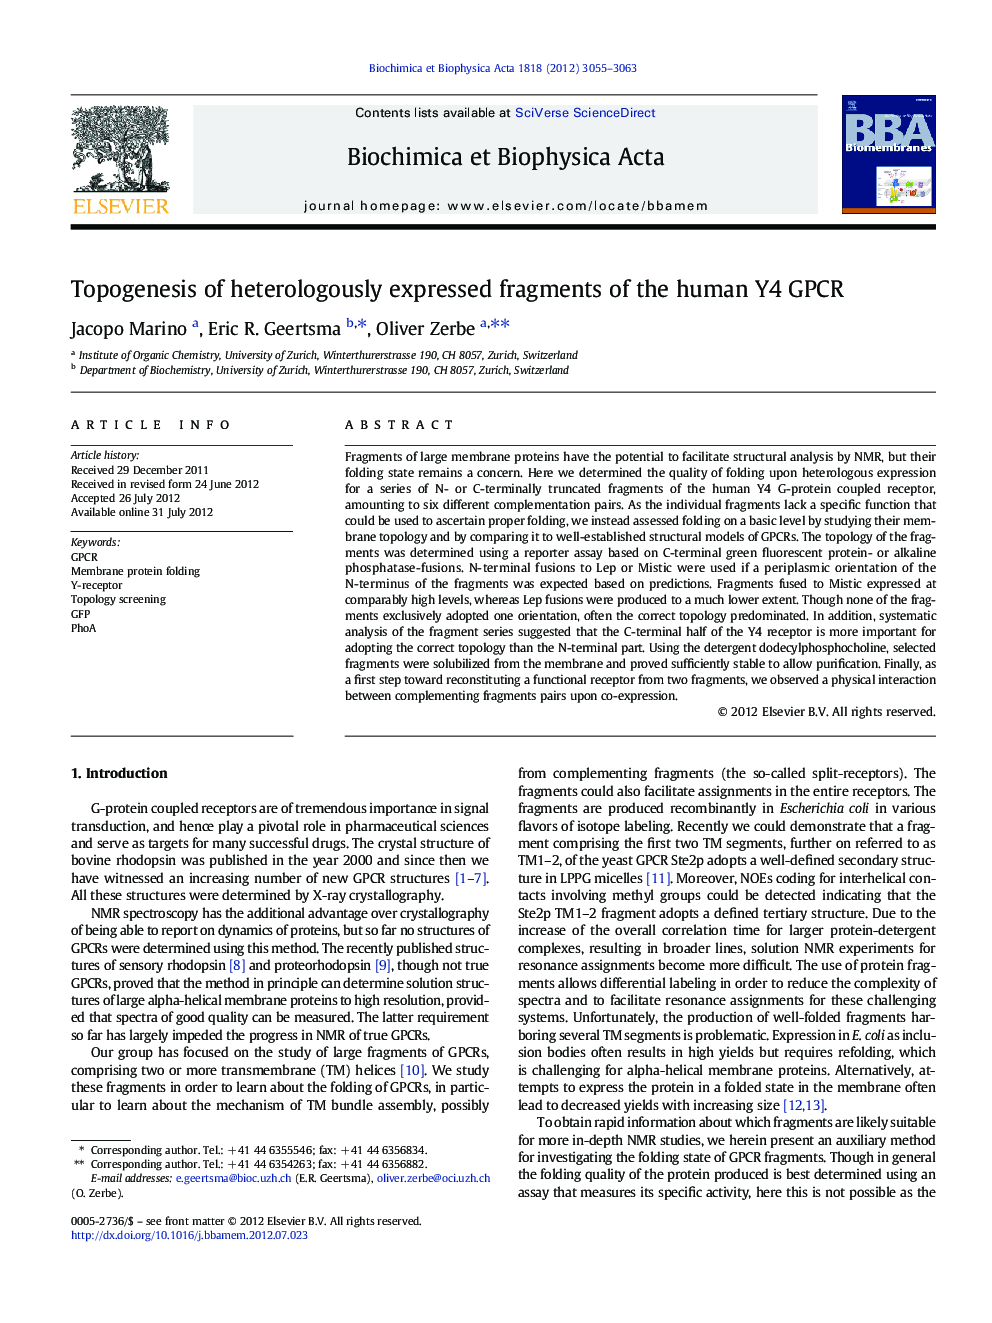 Topogenesis of heterologously expressed fragments of the human Y4 GPCR